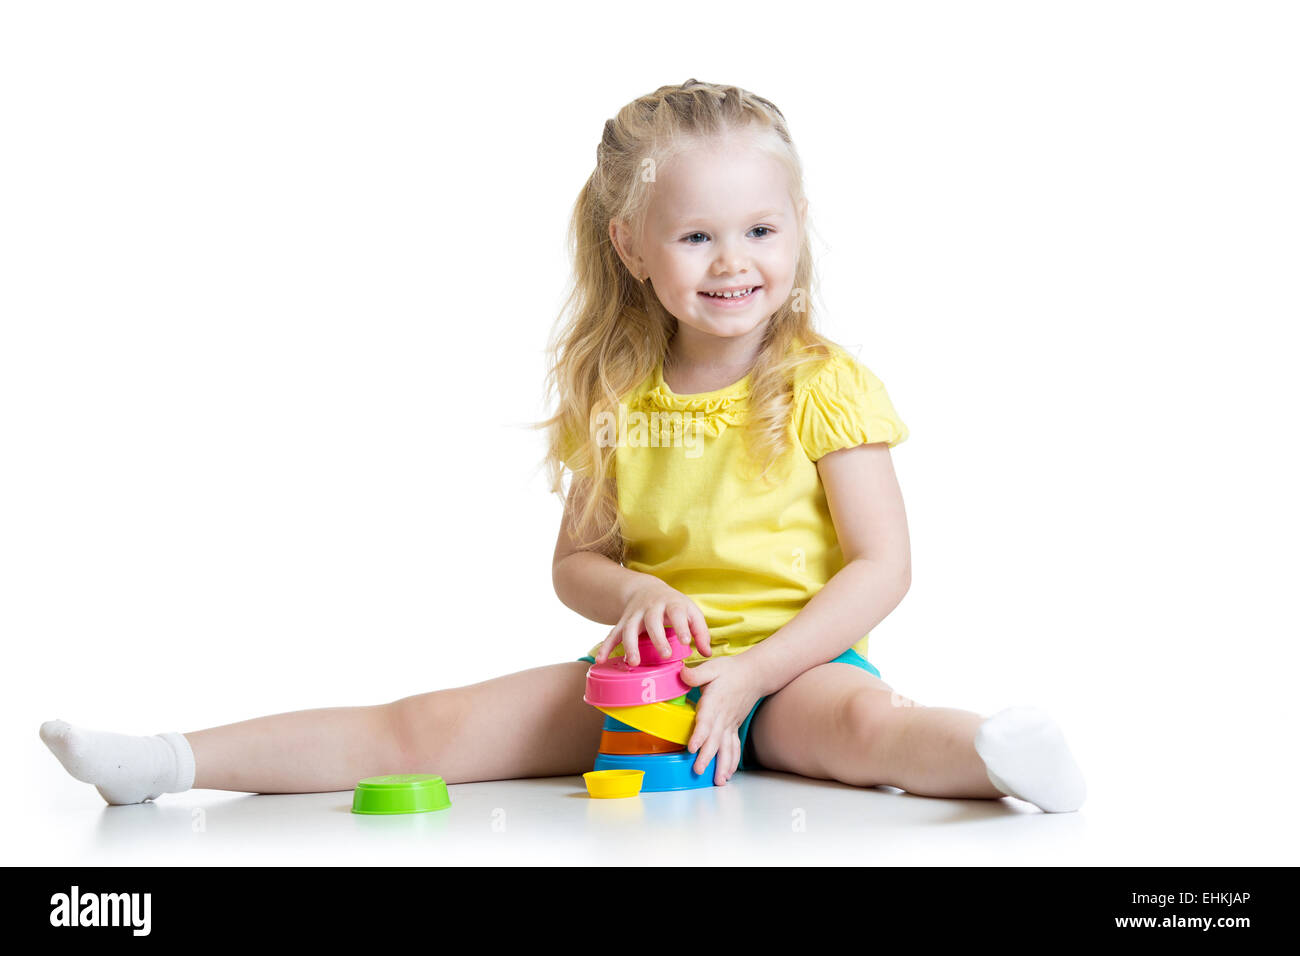 child little girl playing with color toys Stock Photo